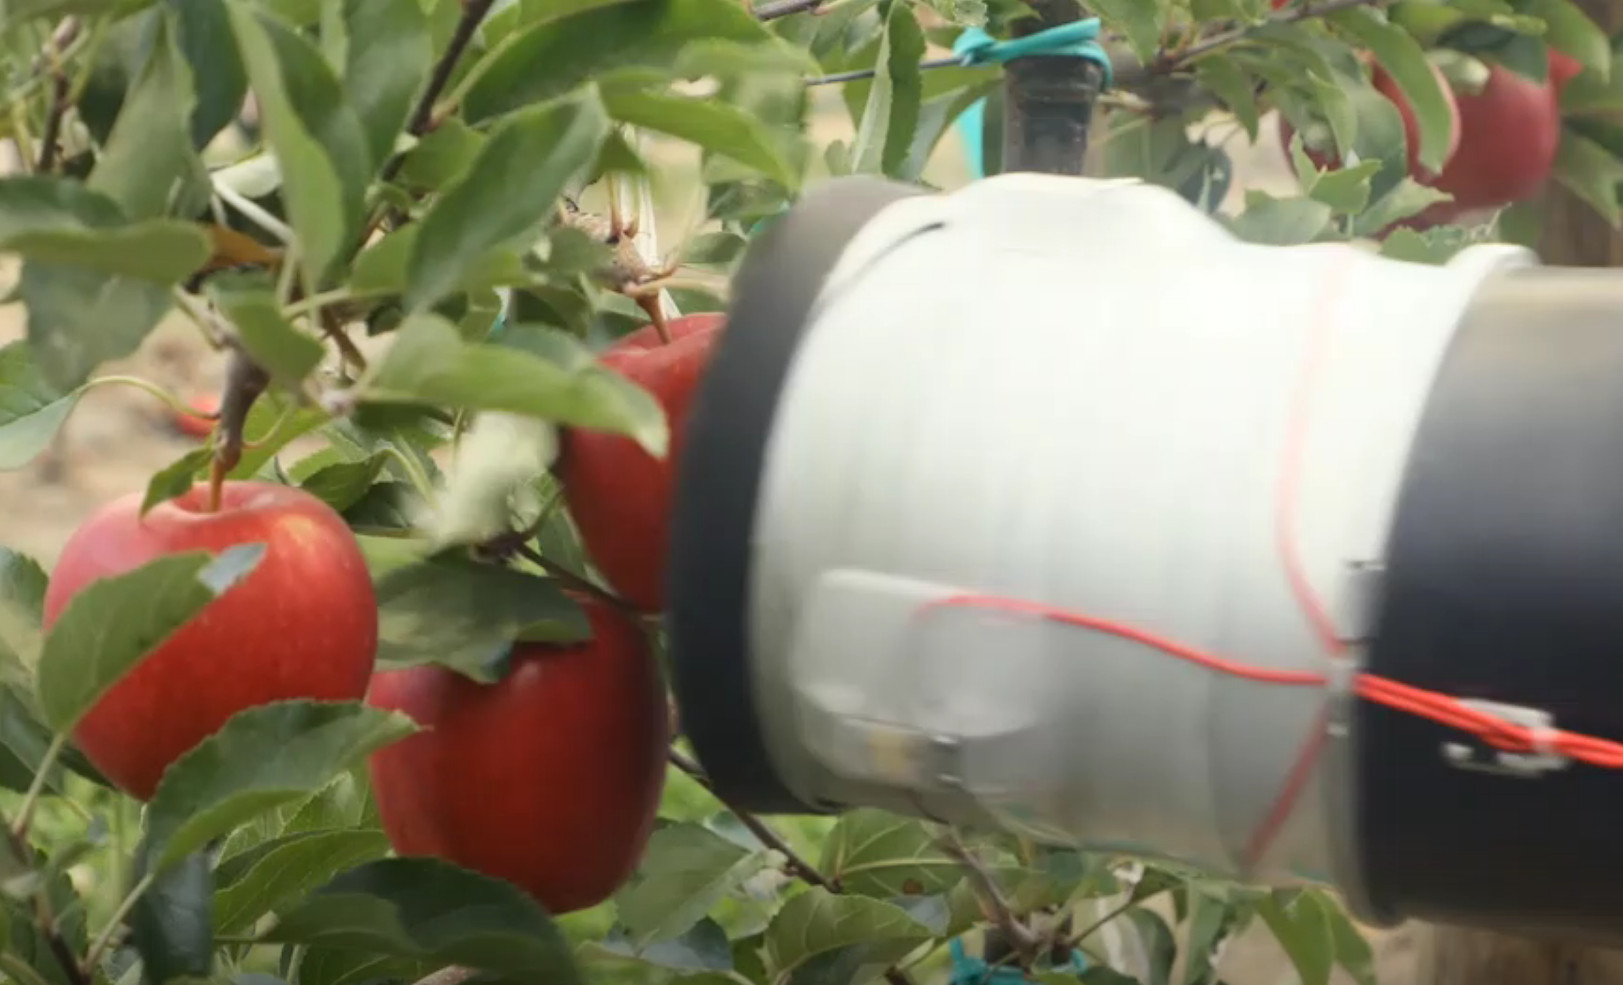 Manipulator for taking apples from the branch